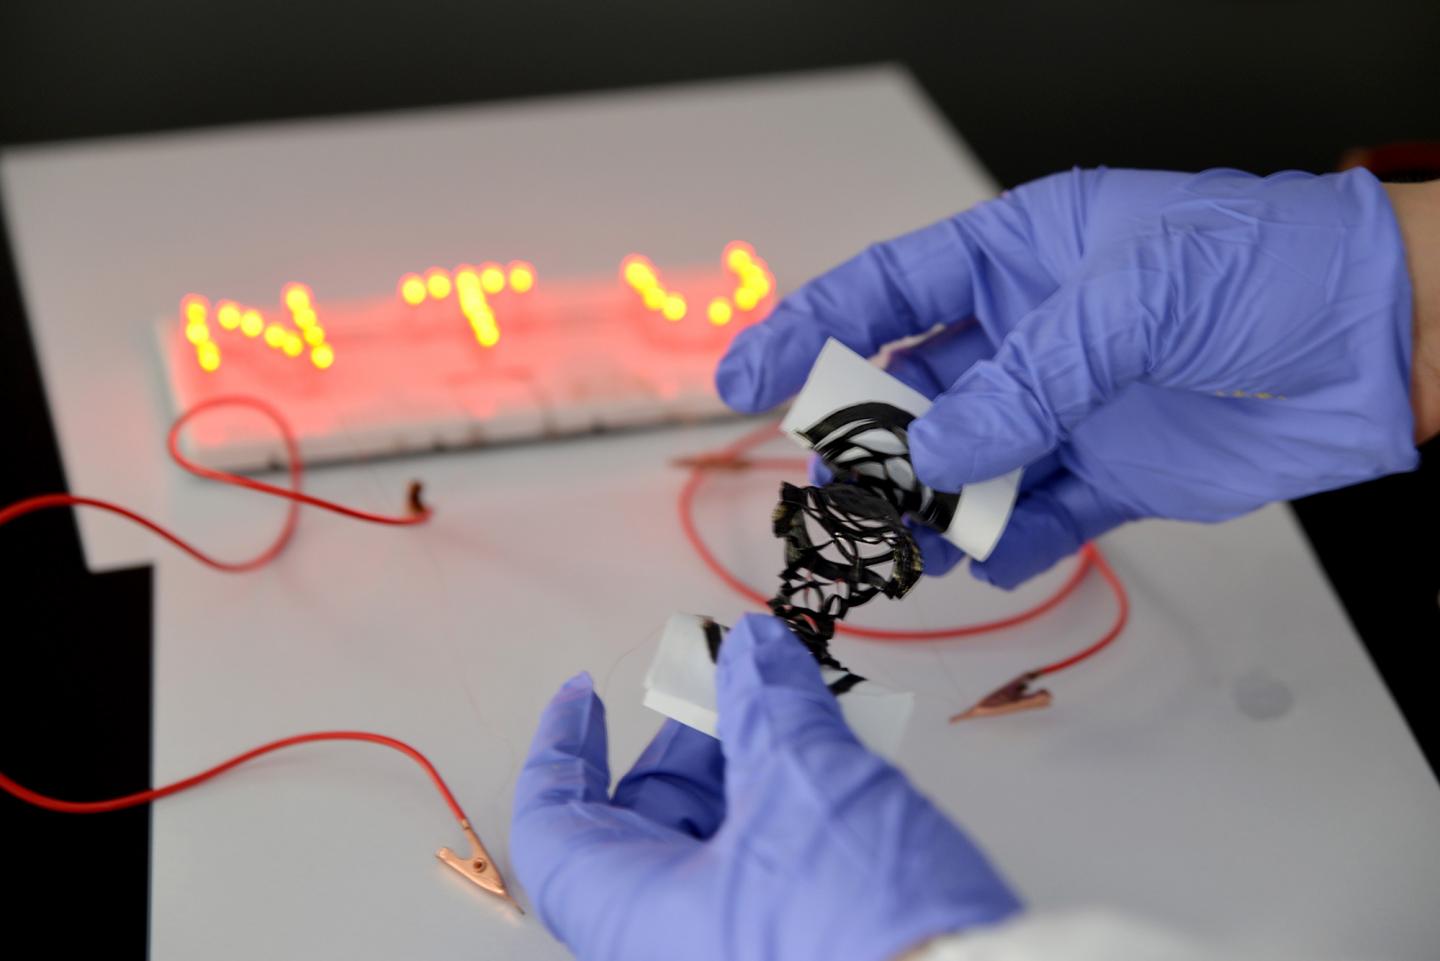 The supercapacitor functions well even when stretched. Source: NTU Singapore